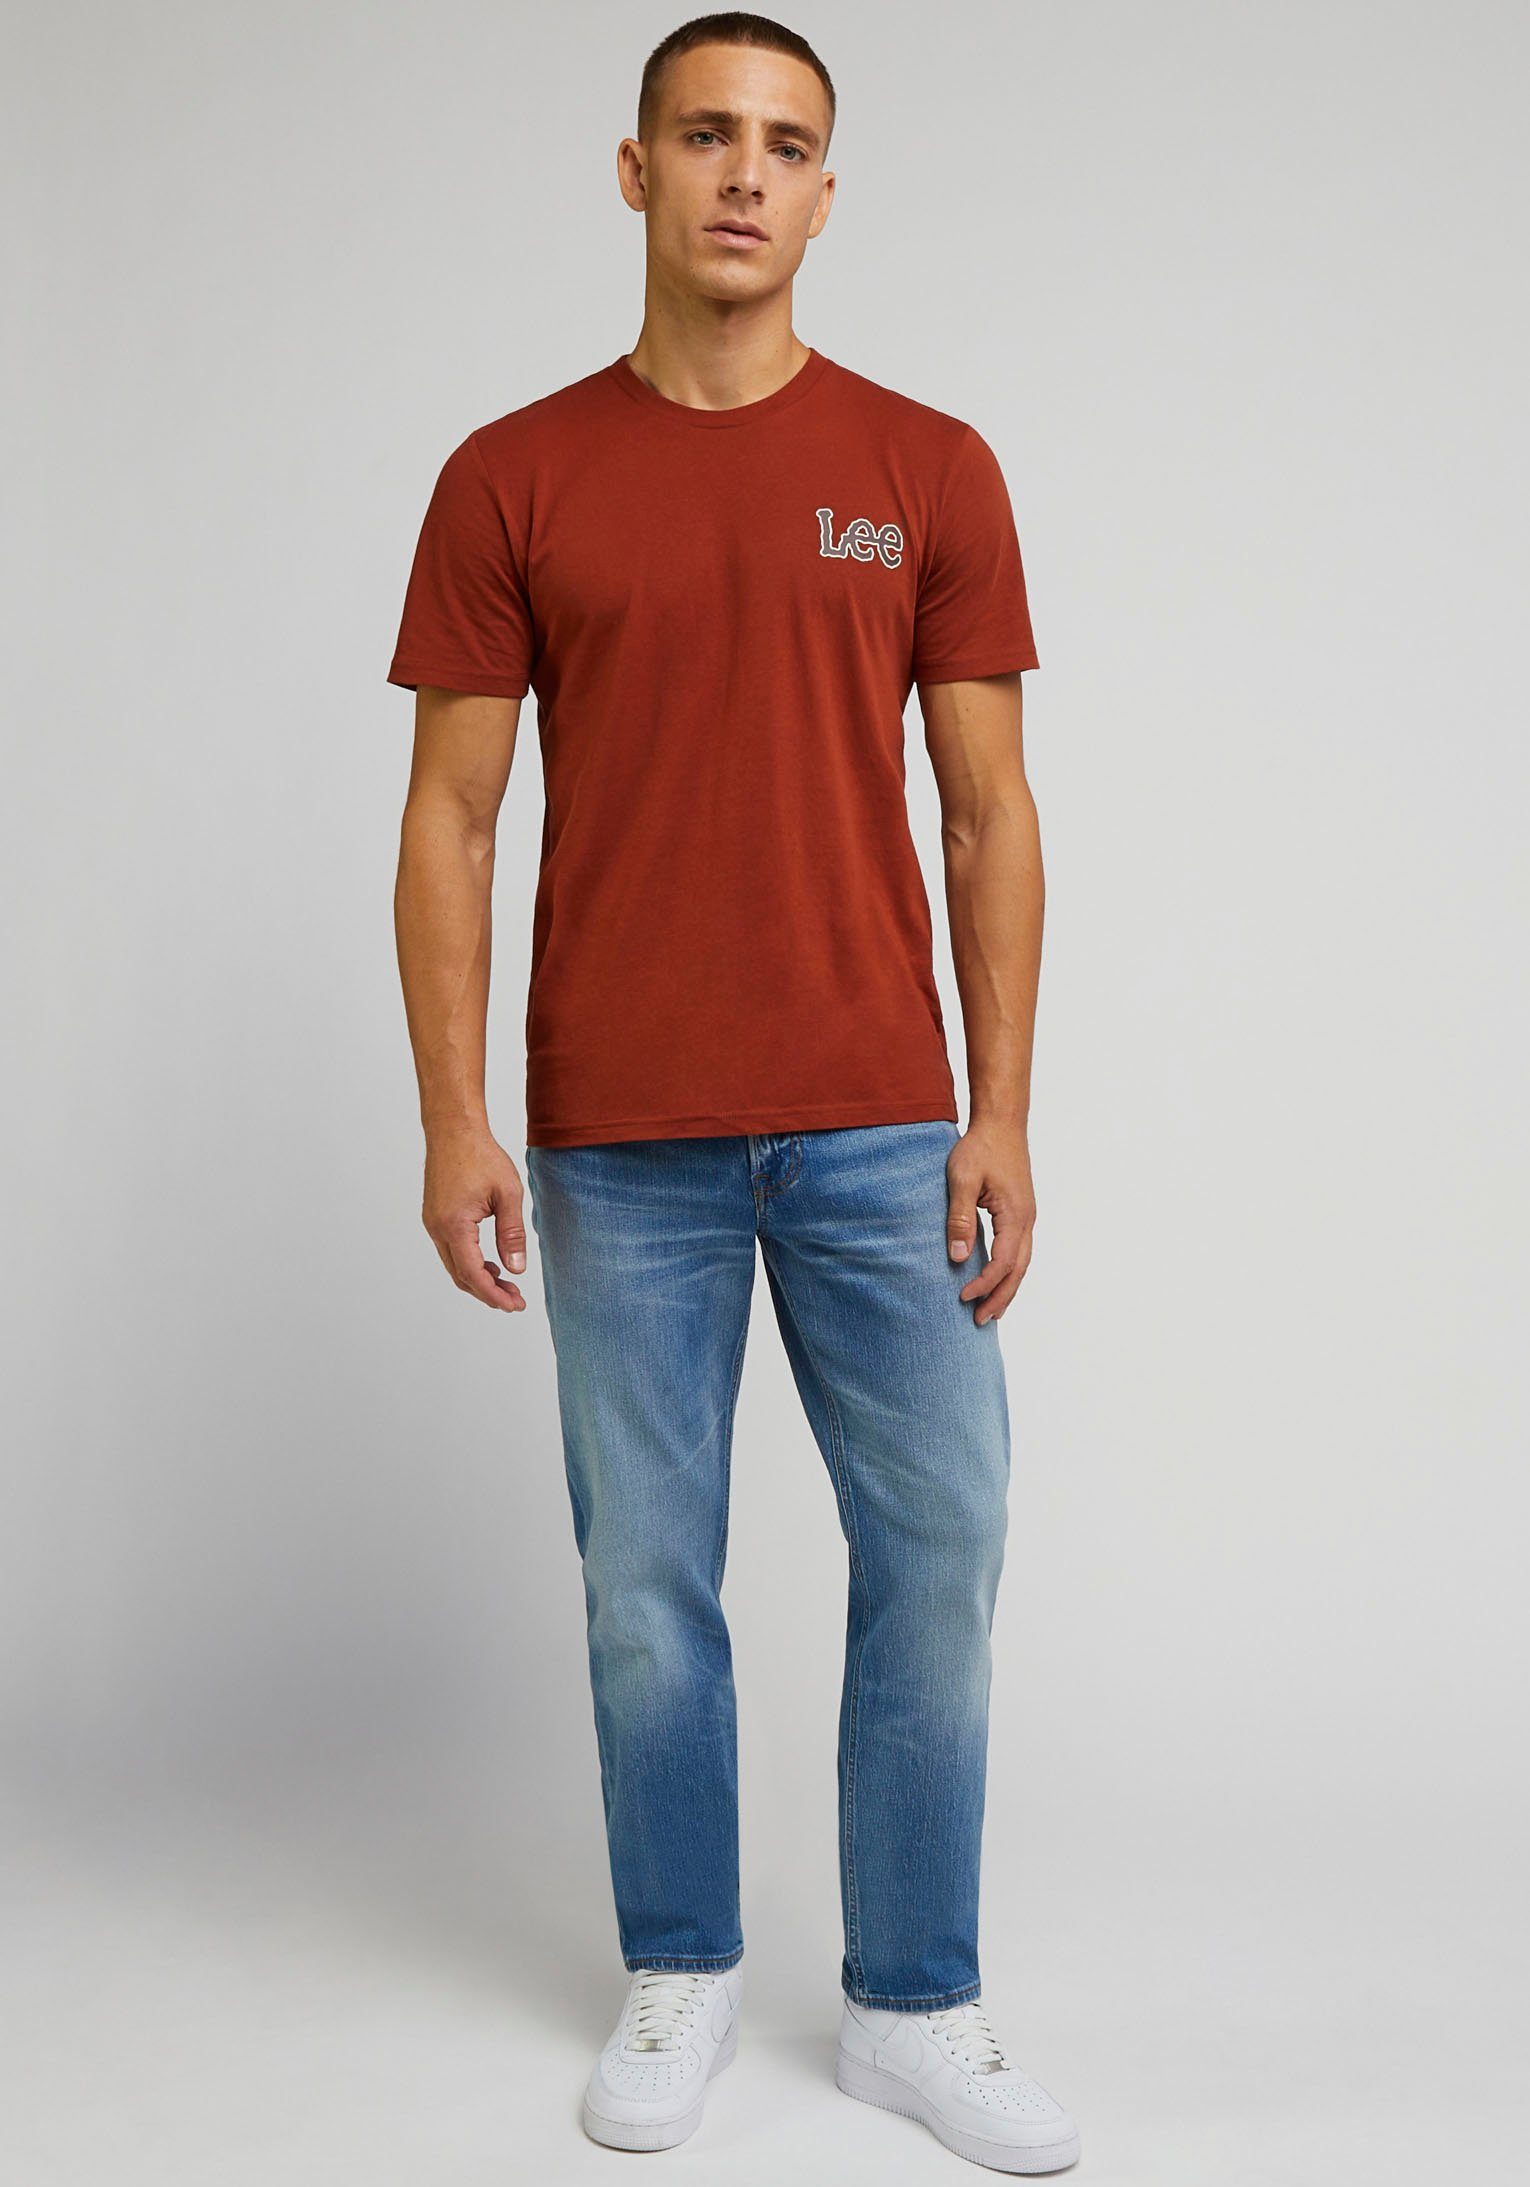 Lee Relax fit jeans West